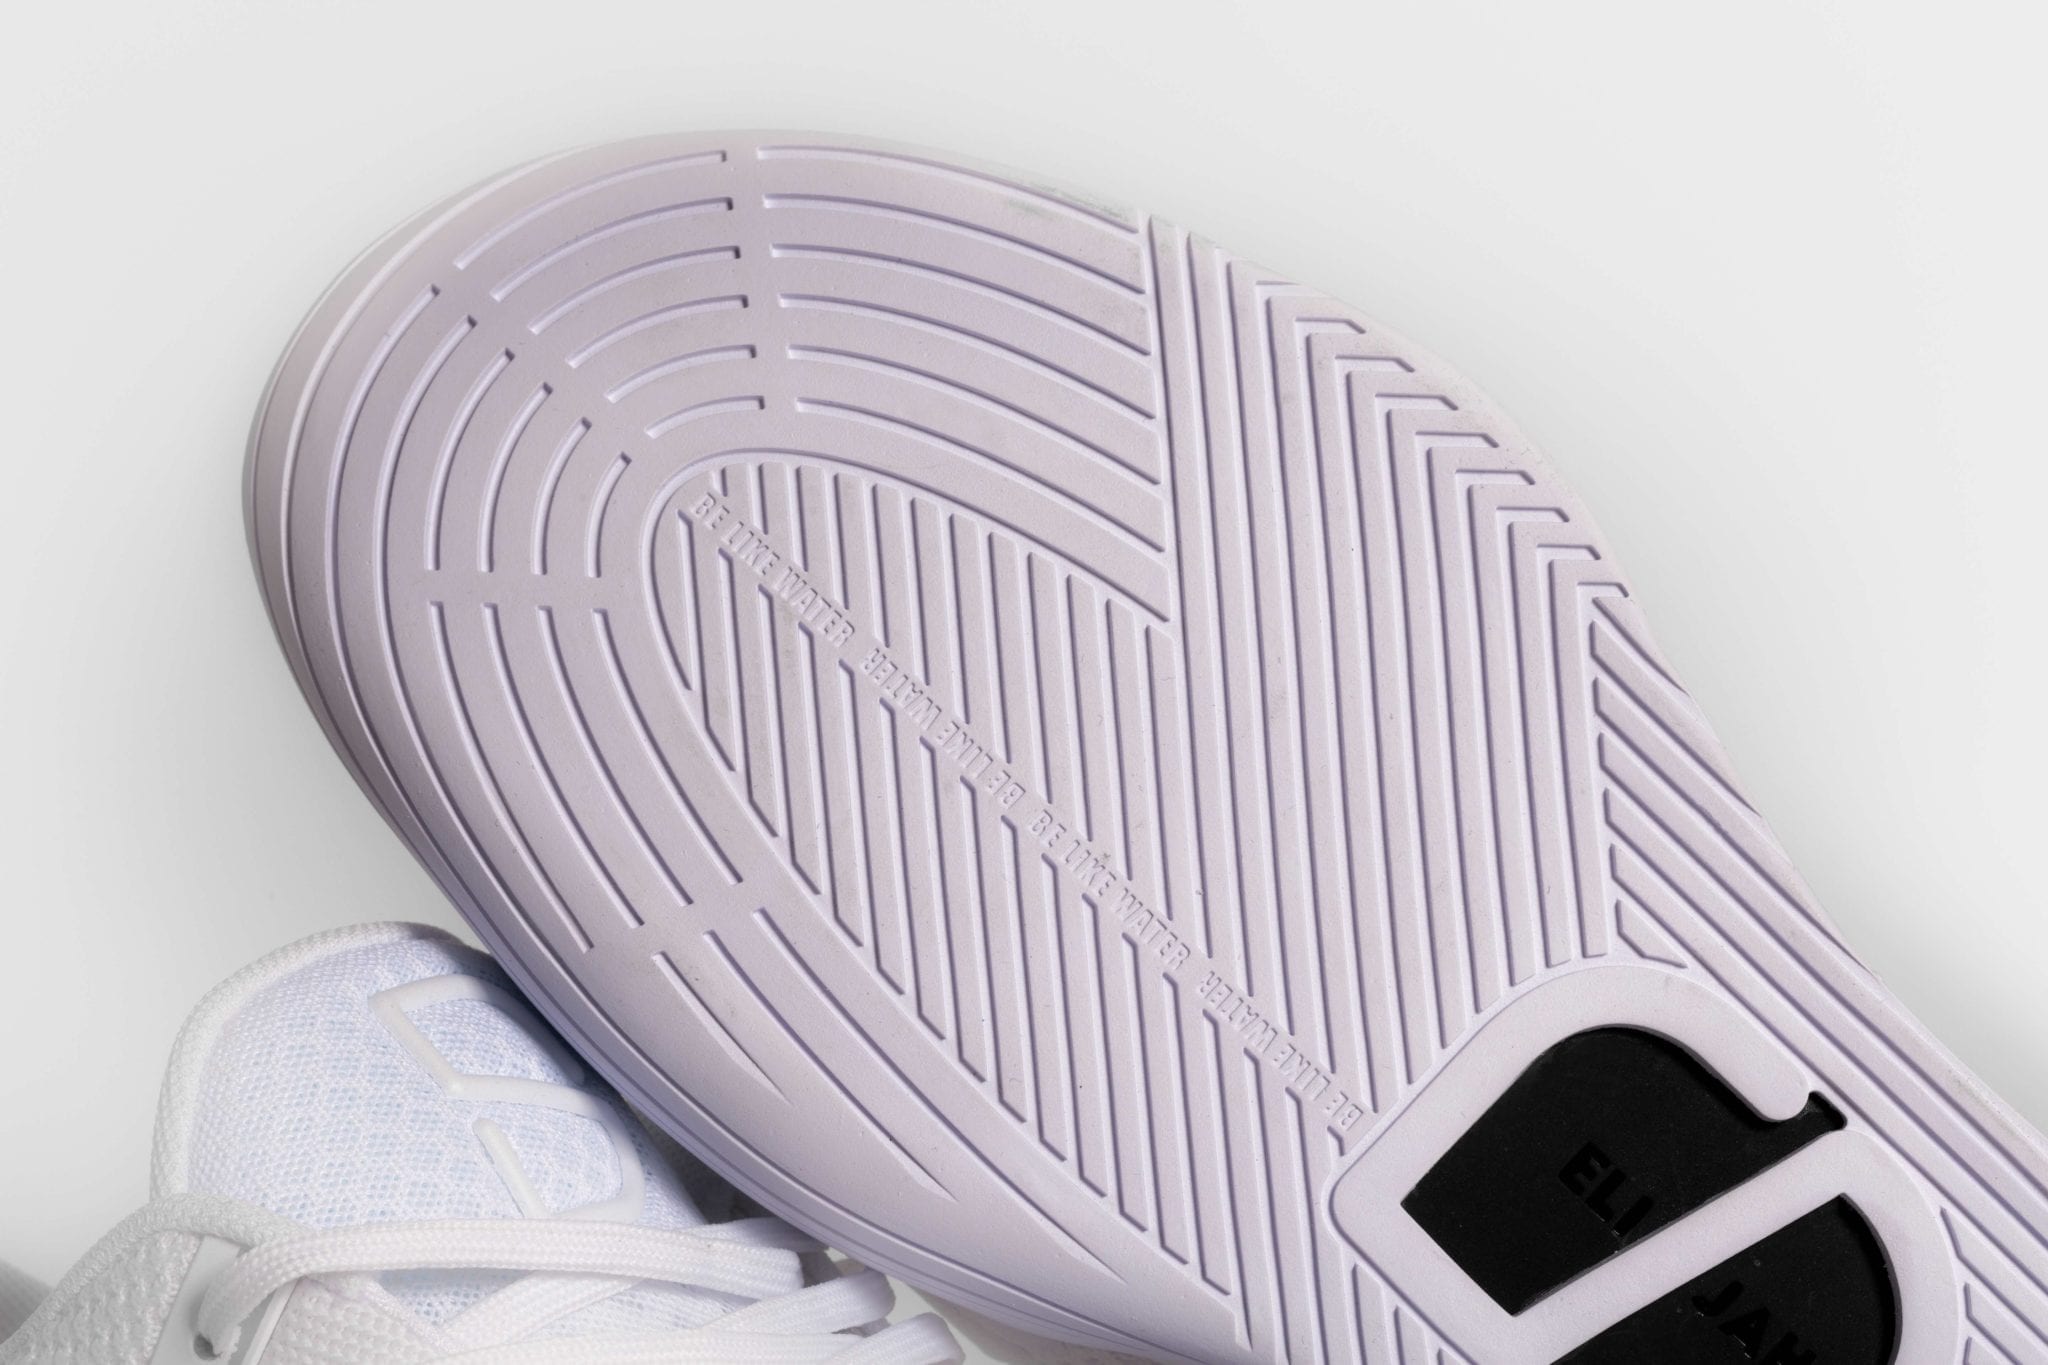 The outsole of Spencer's shoe, with the phrase "Be Like Water" inscribed. (Courtesy of Spencer Dinwiddie)